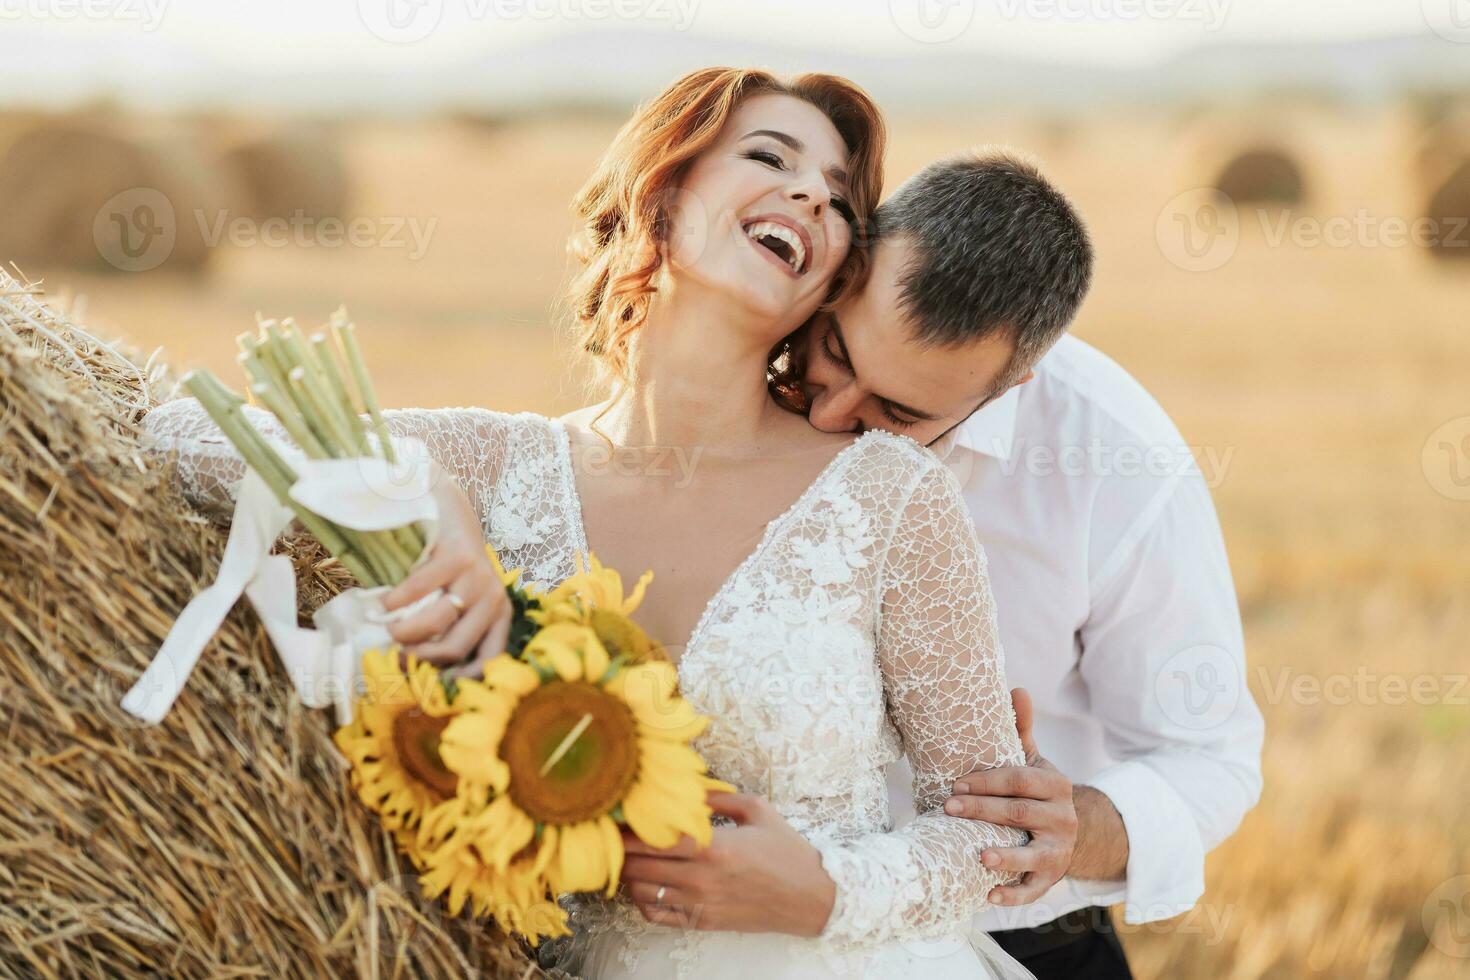 Wedding portrait of the bride and groom. The groom, tearing his shirt, stands behind the bride, near a bale of hay. Red-haired bride in a long dress with a bouquet of sunflowers. Stylish groom. Summer photo